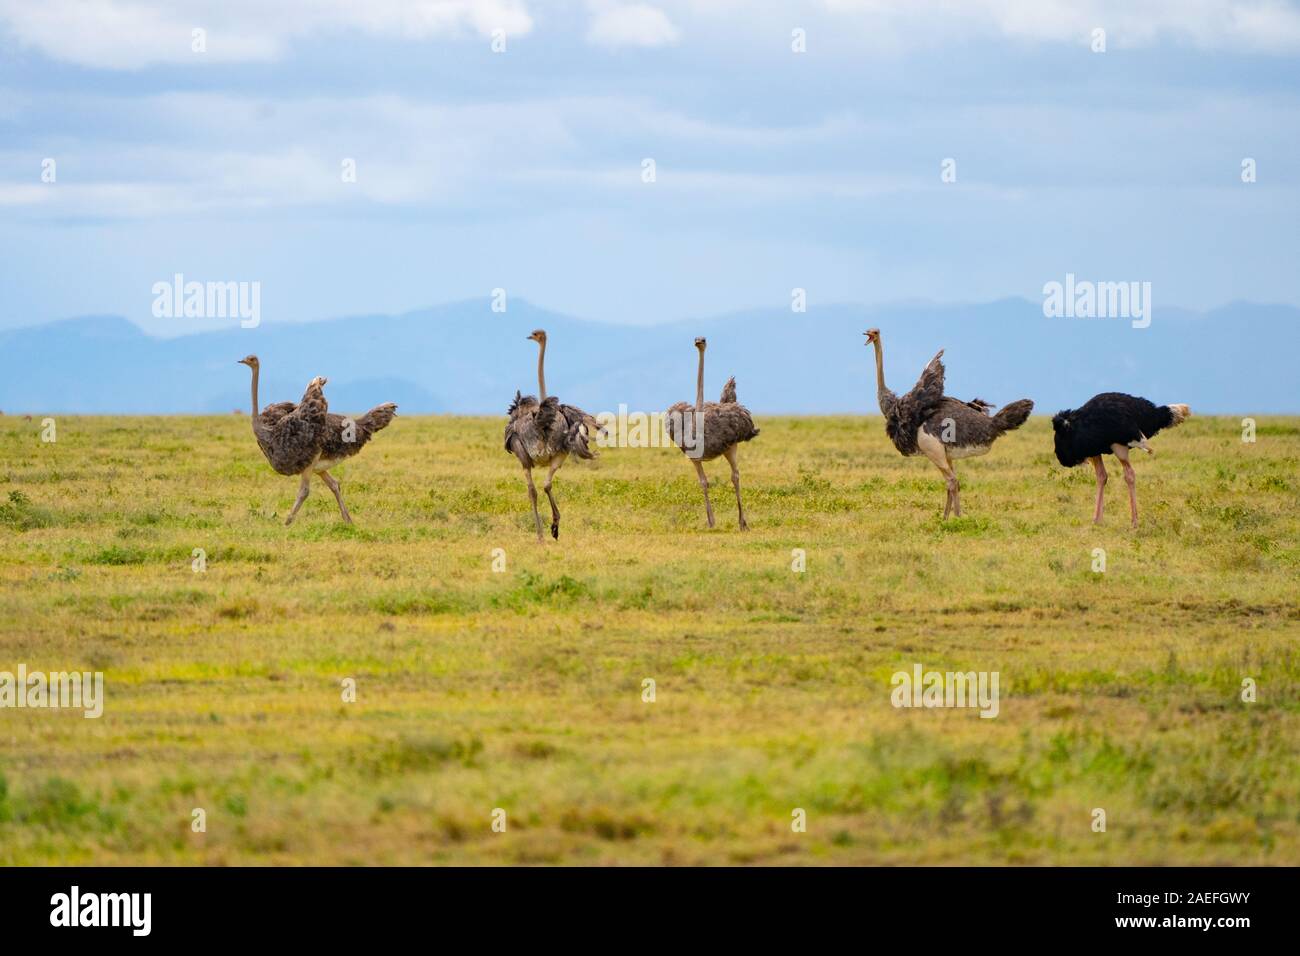 Family of ostriches in Ngorongoro Crater. Stock Photo